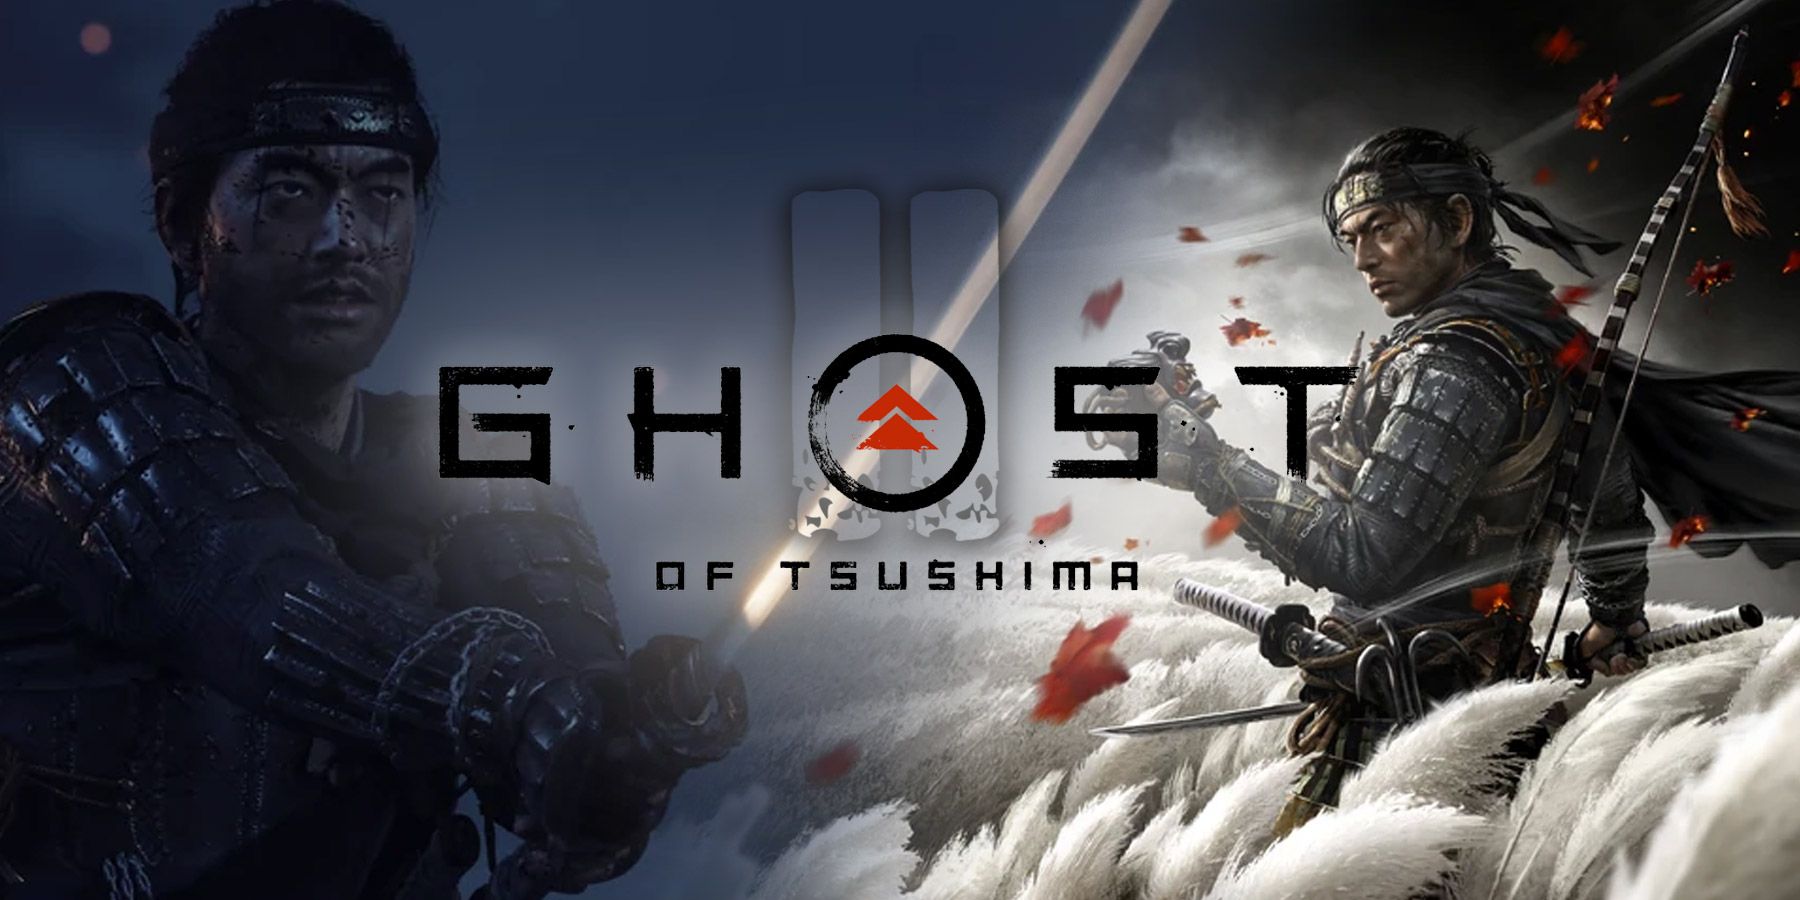 Ghost of Tsushima 2: Release Date, Confirmed News, and Latest